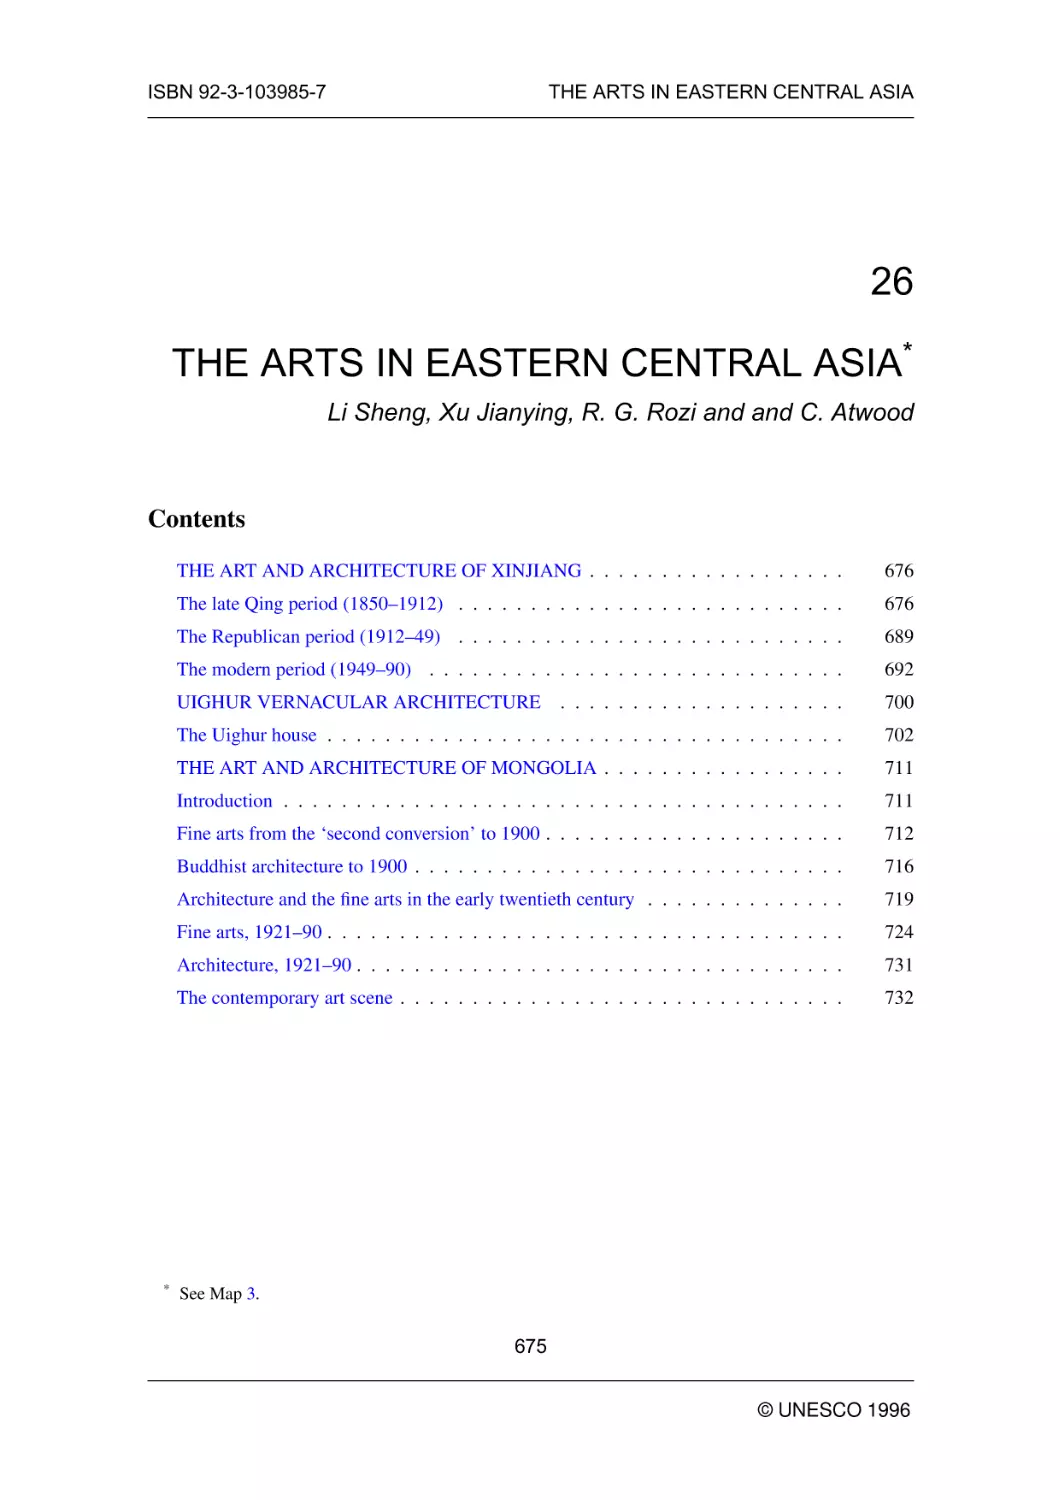 THE ARTS IN EASTERN CENTRAL ASIA